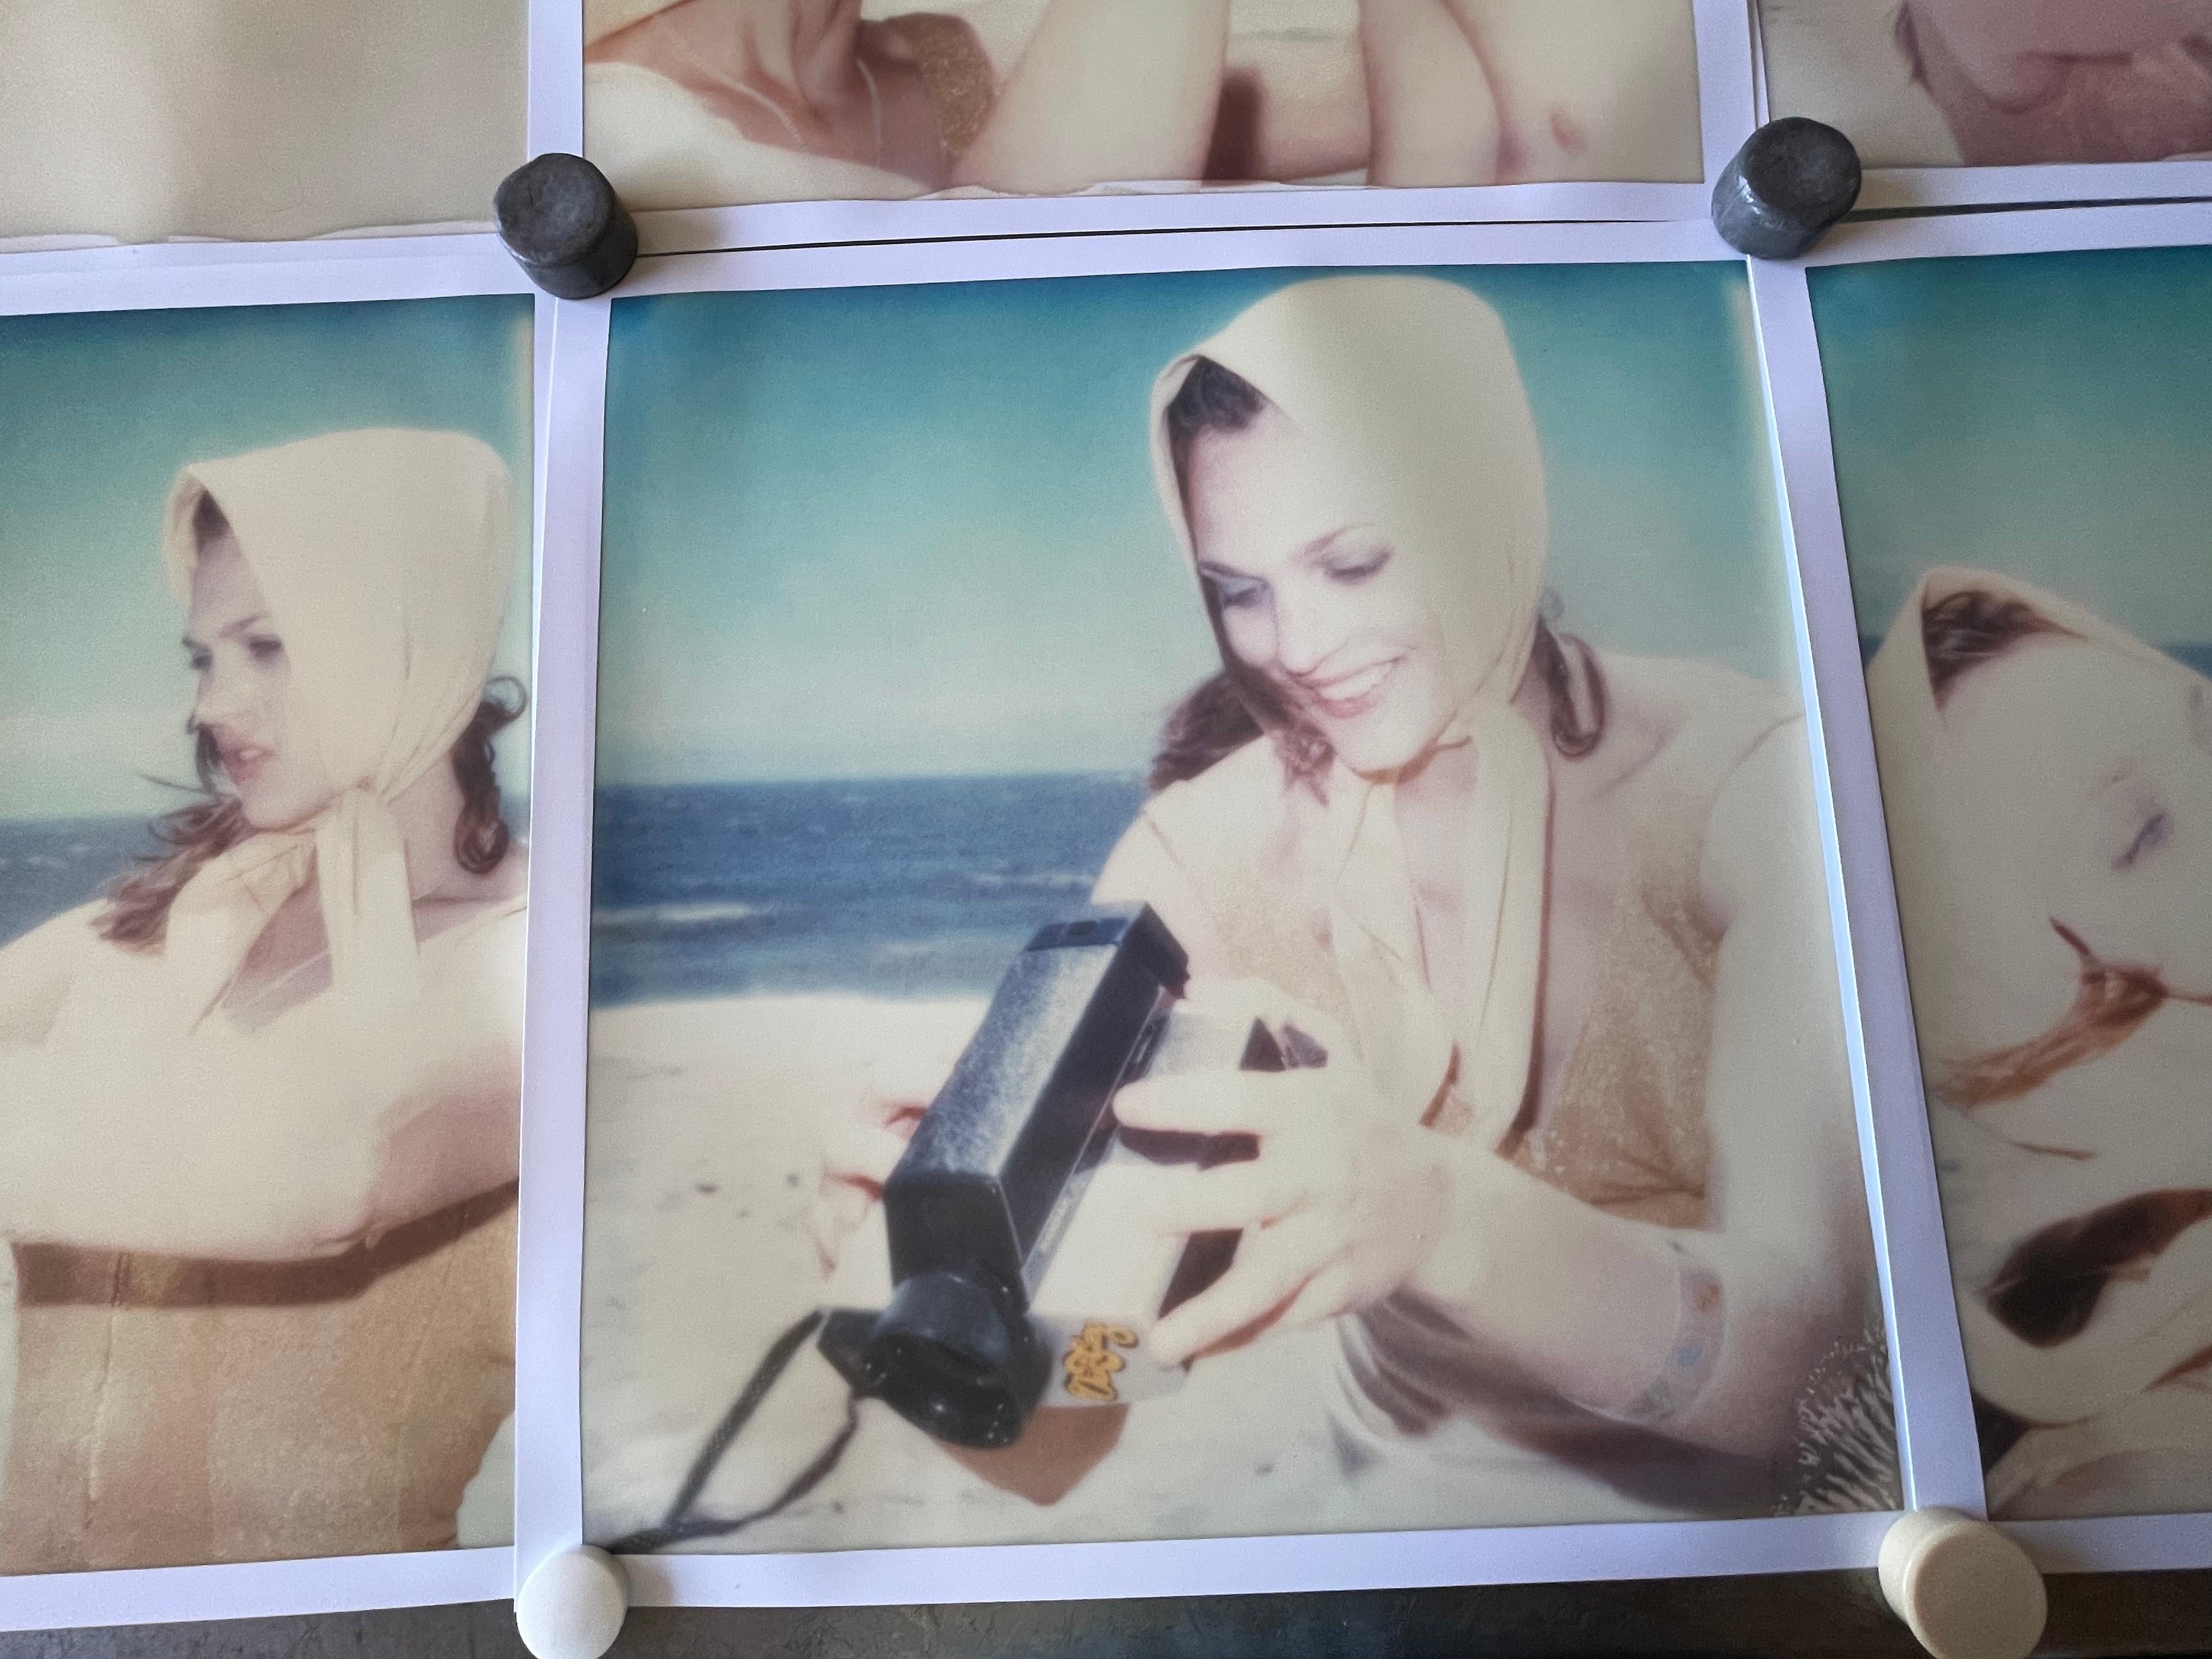 The Diva and the Boy (Beachshoot) - 9 pieces - Polaroid, Vintage, Contemporary For Sale 8